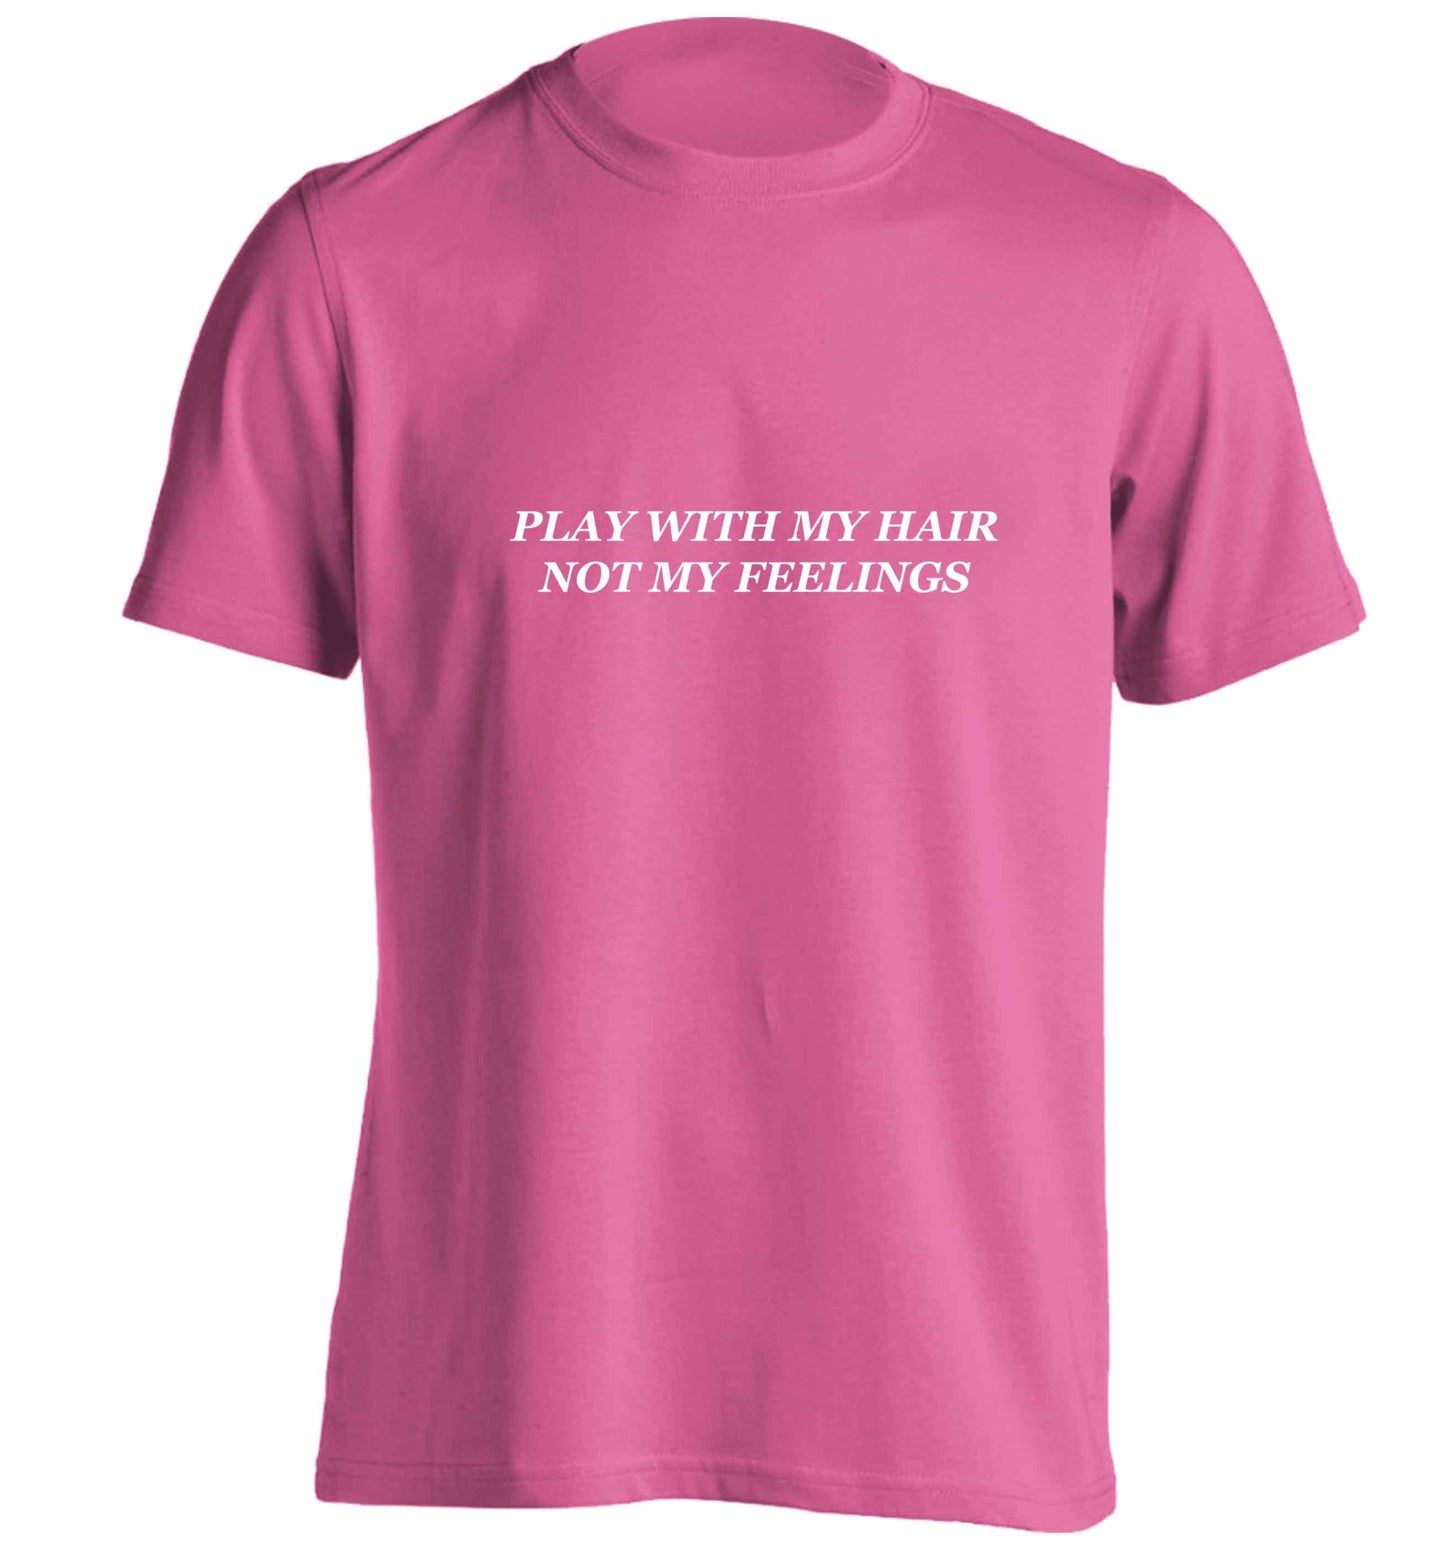 Play with my hair not my feelings adults unisex pink Tshirt 2XL